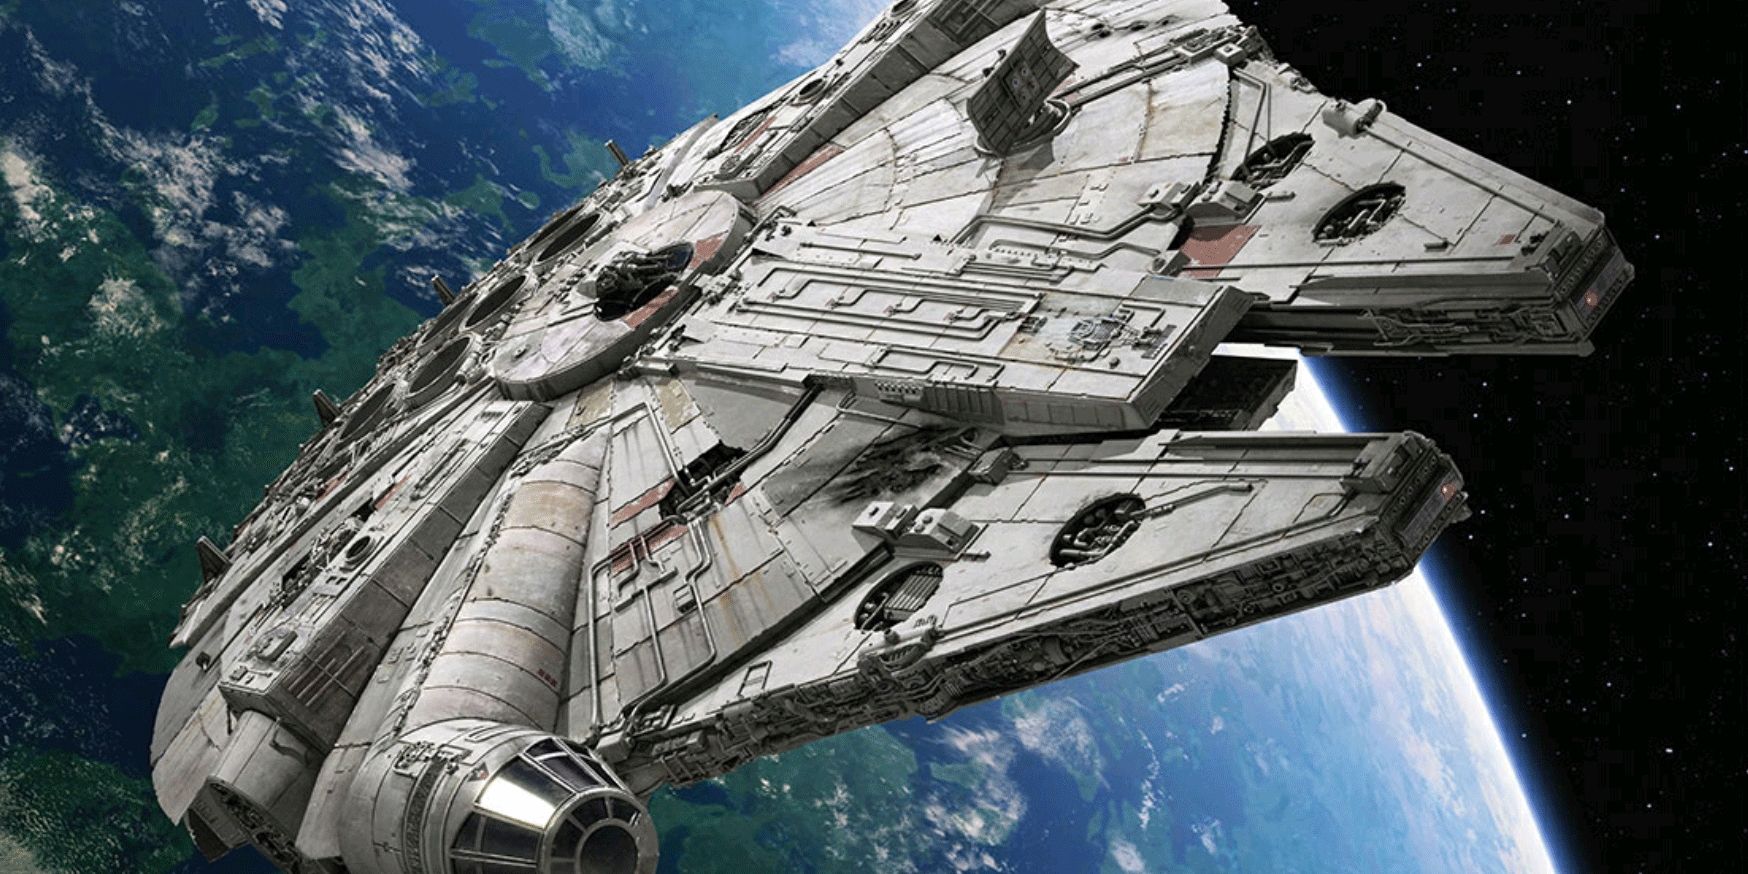 Disney tried to hide the Millennium Falcon but forgot it was on Google Maps